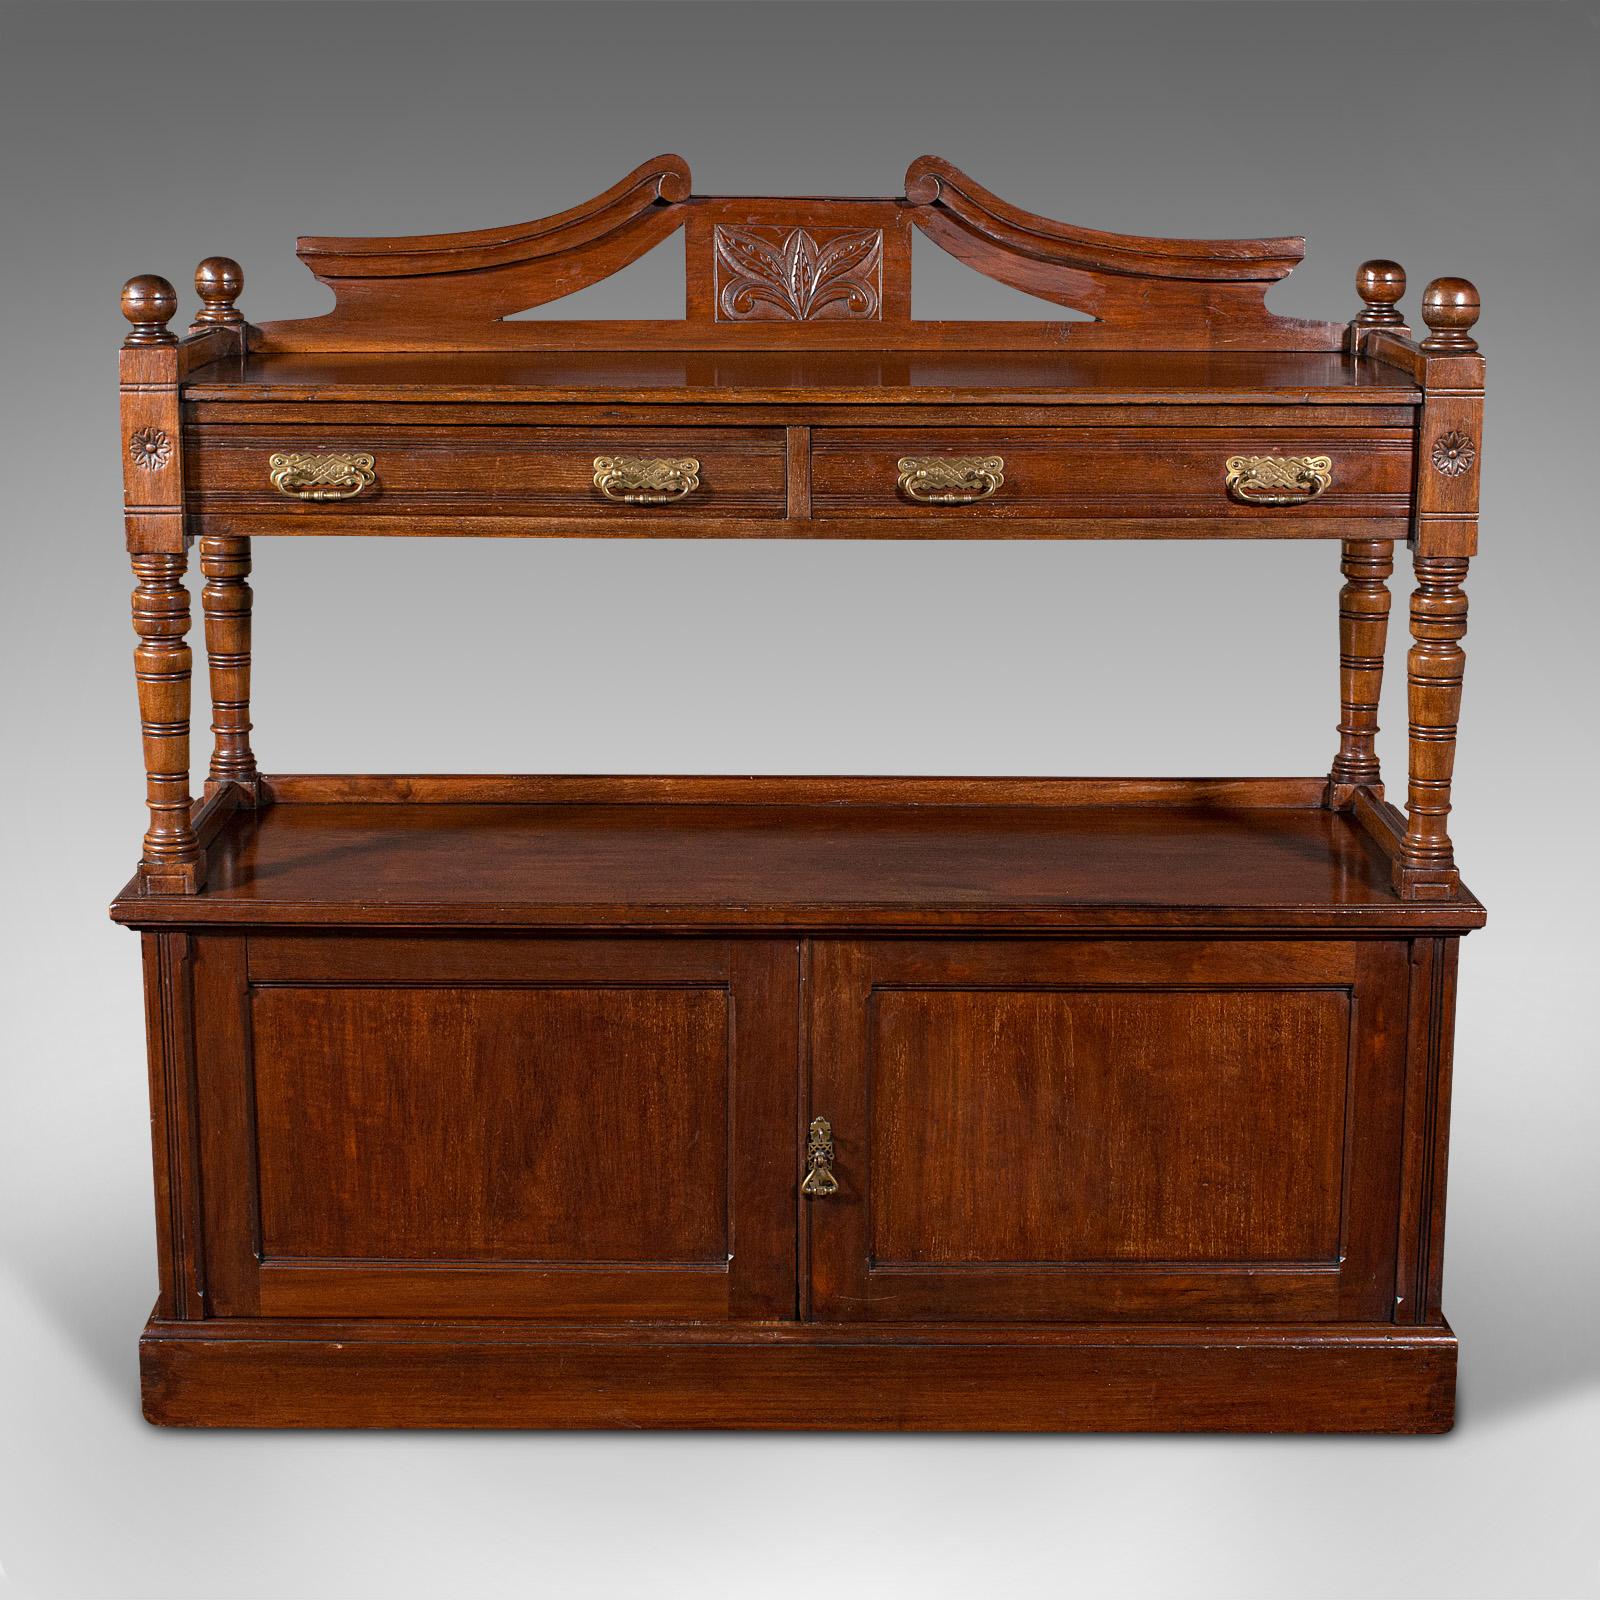 This is a large antique buffet. An English, walnut server or sideboard, dating to the Victorian period, circa 1870.

Classic buffet with ornate decoration
Displays a desirable aged patina throughout
Select walnut shows fine grain interest
Rich